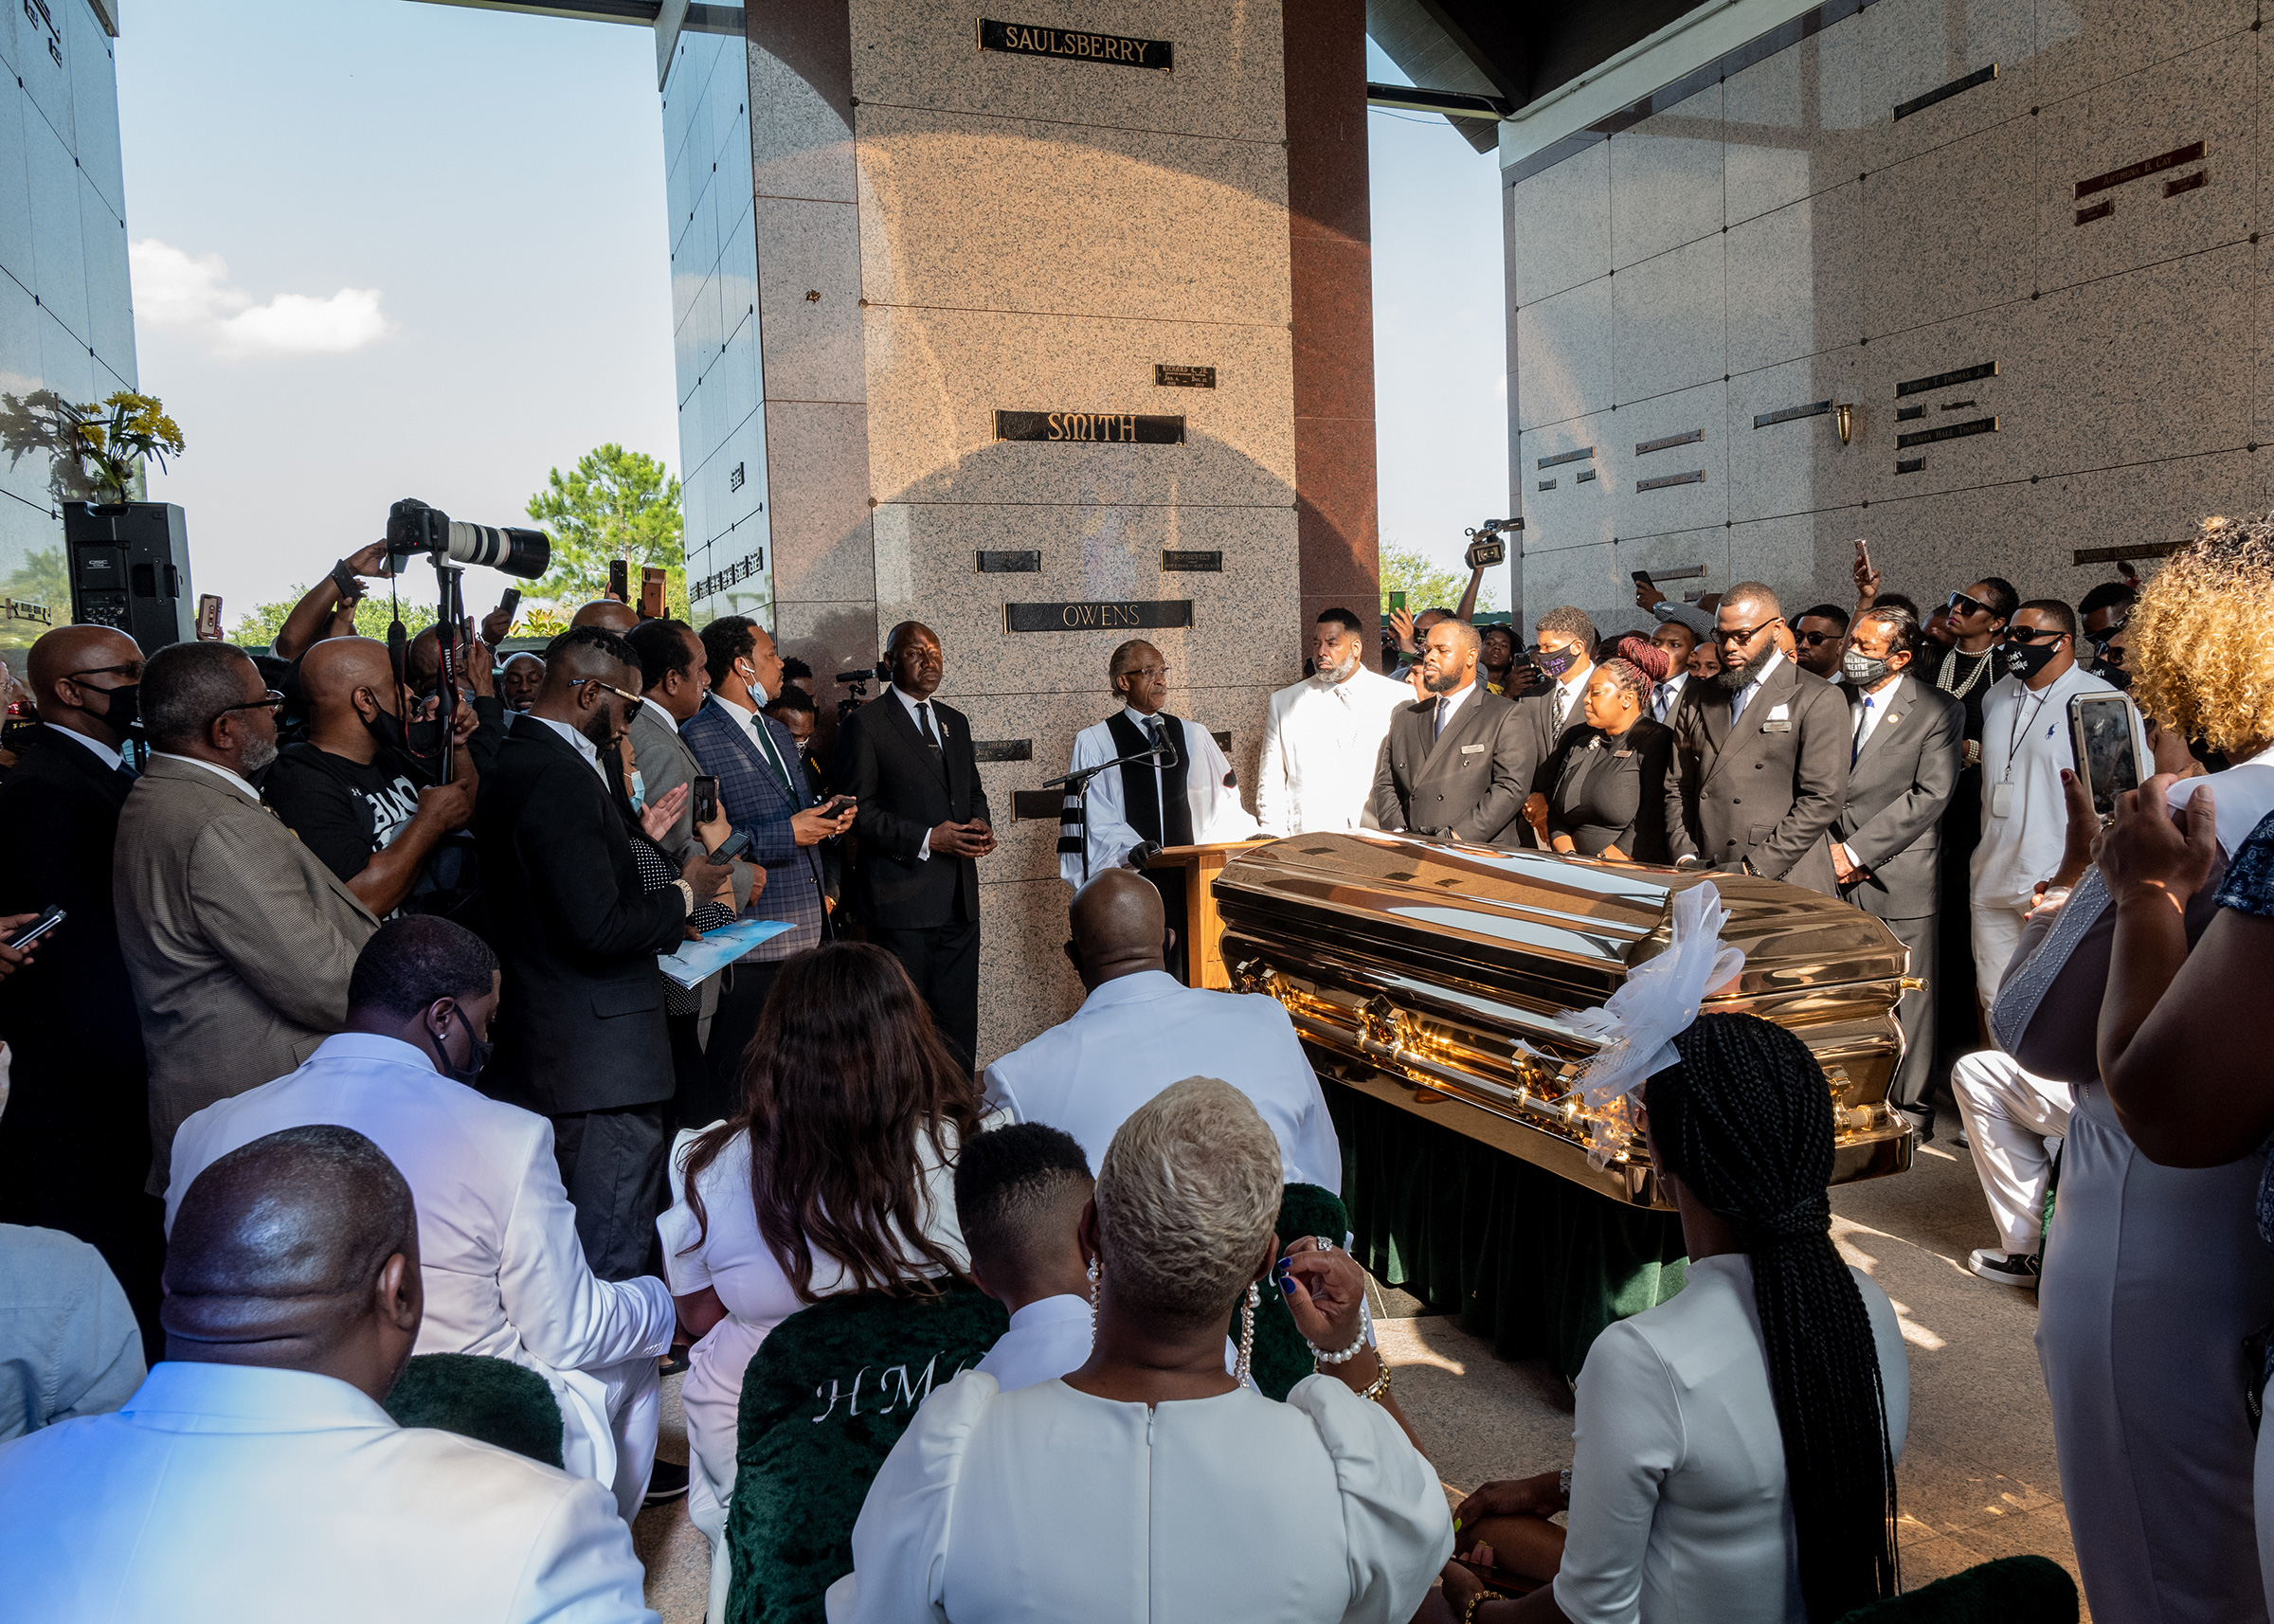 Rev. Al Sharpton speaks at the private funeral service for George Floyd on June 9, 2020. (Ruddy Roye for TIME)